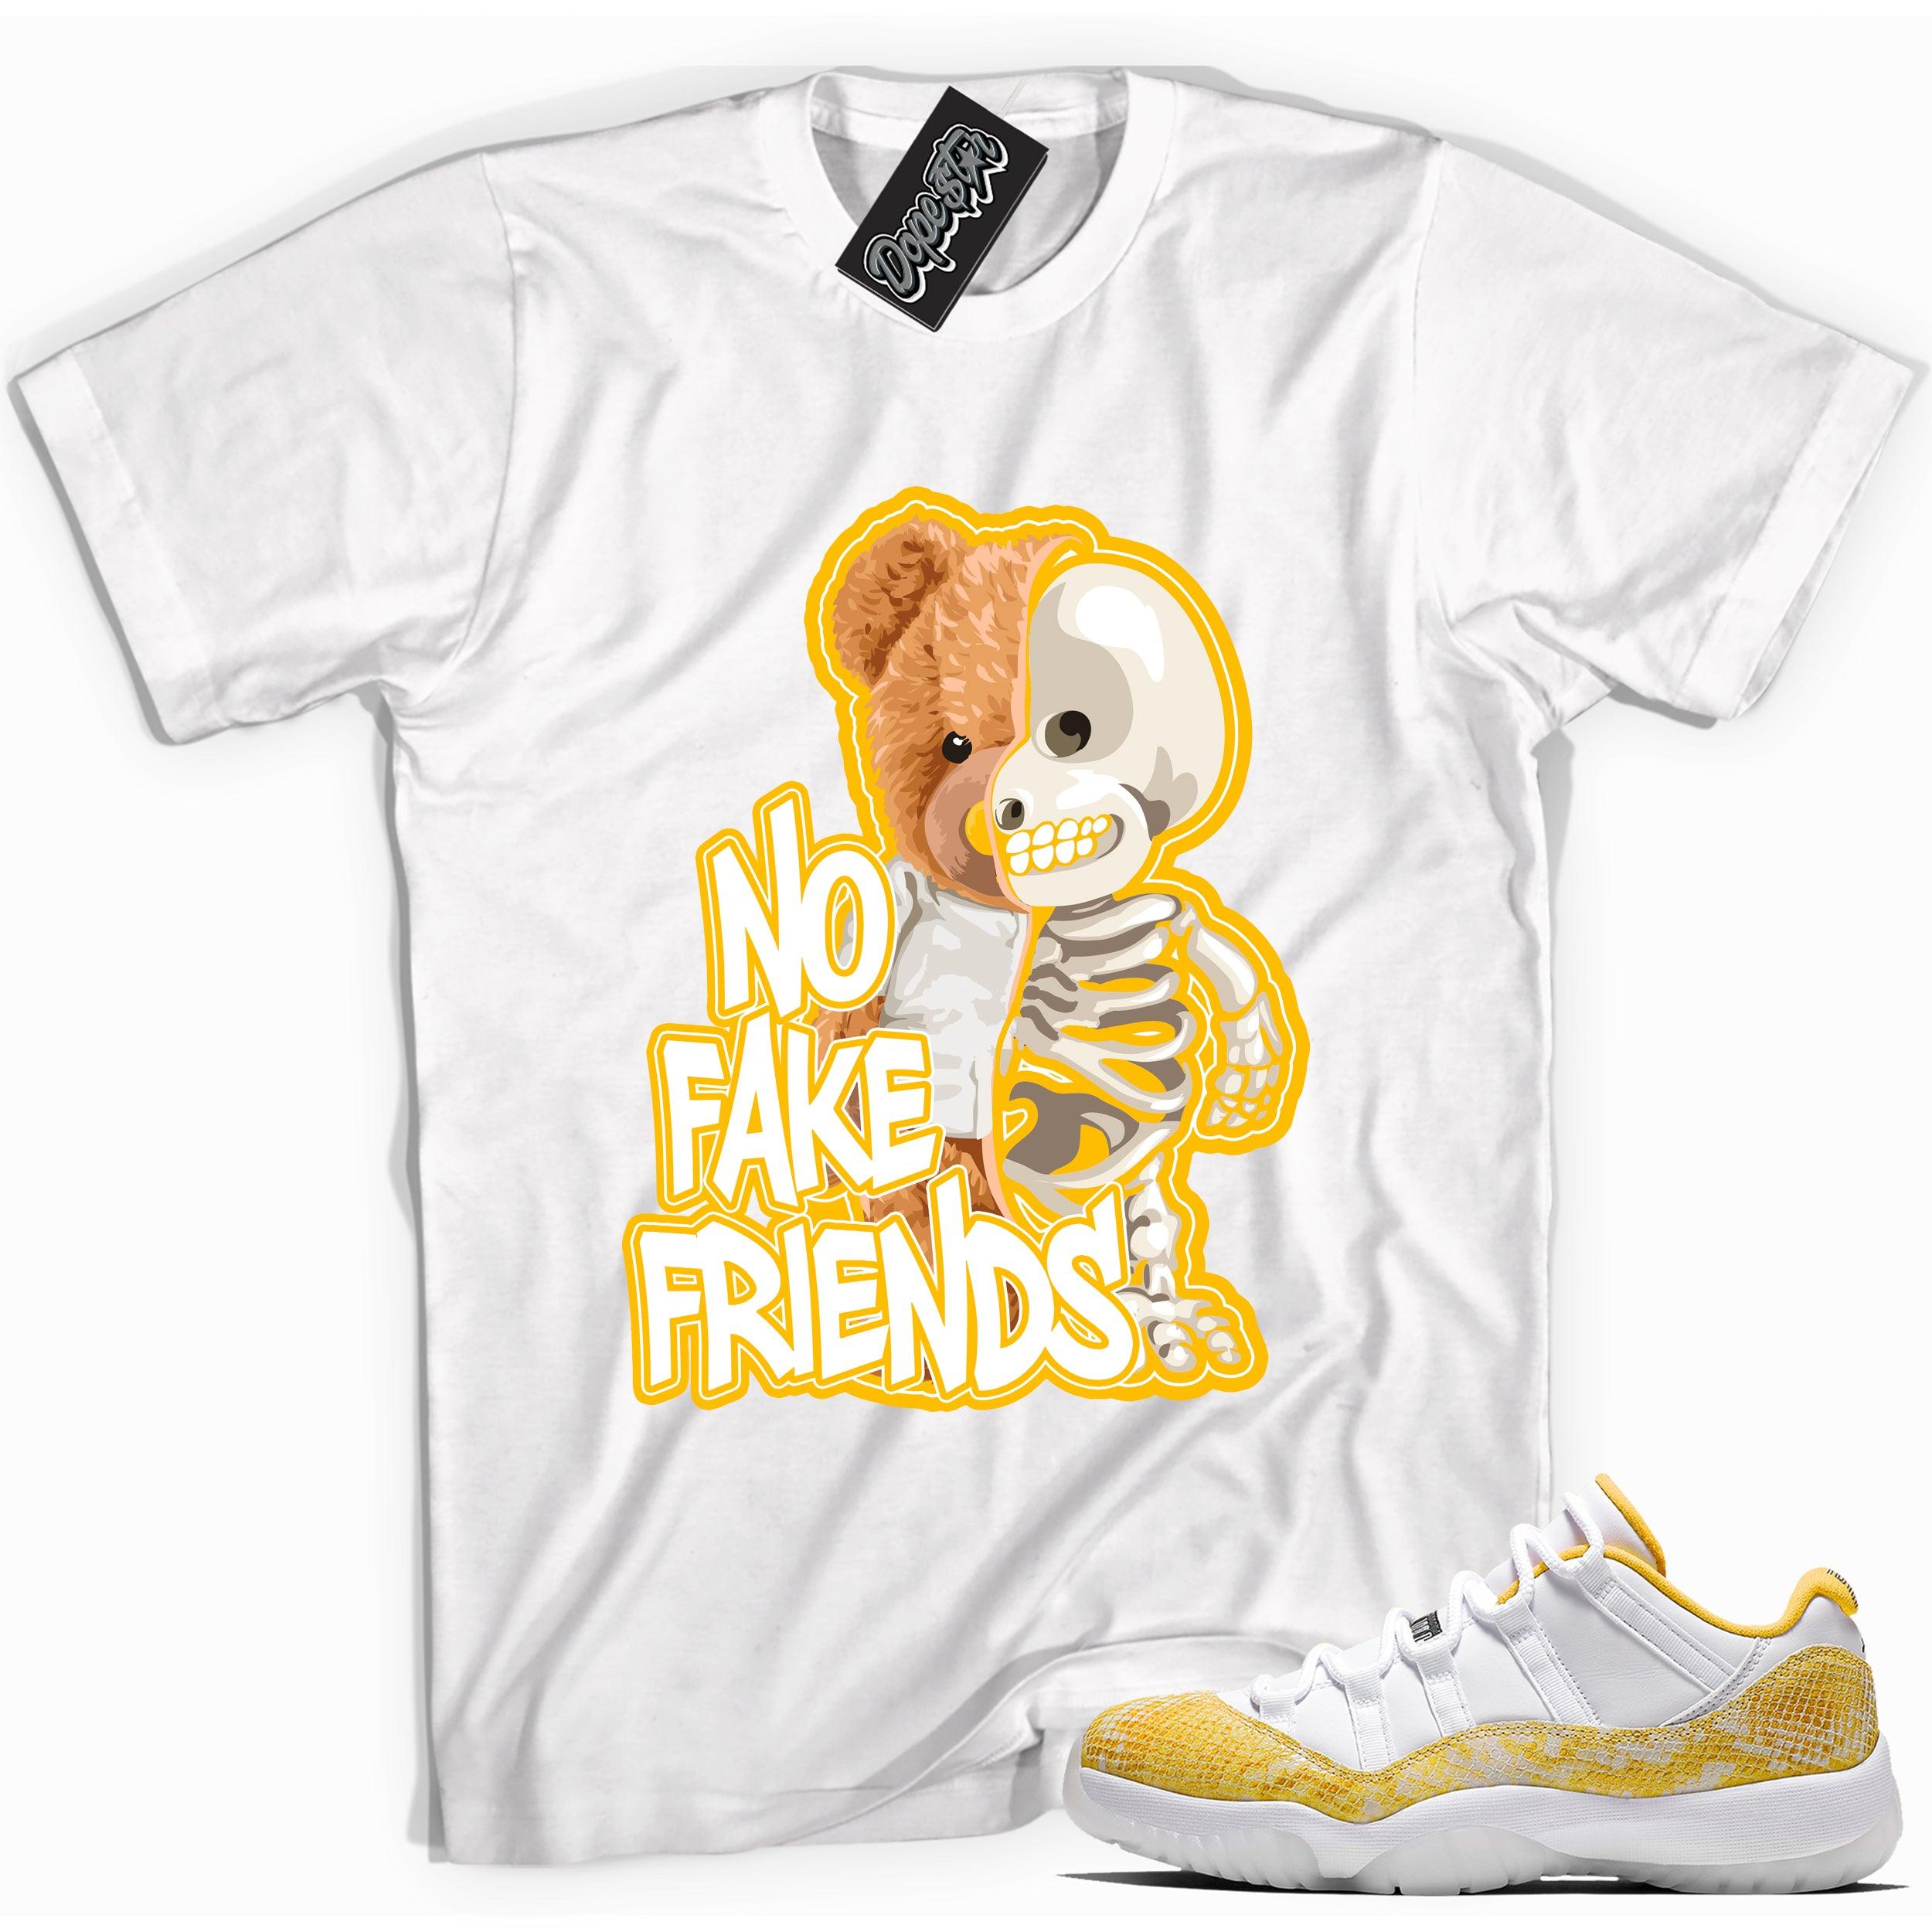 Cool white graphic tee with 'no fake friends' print, that perfectly matches Air Jordan 11 Low Yellow Snakeskin sneakers